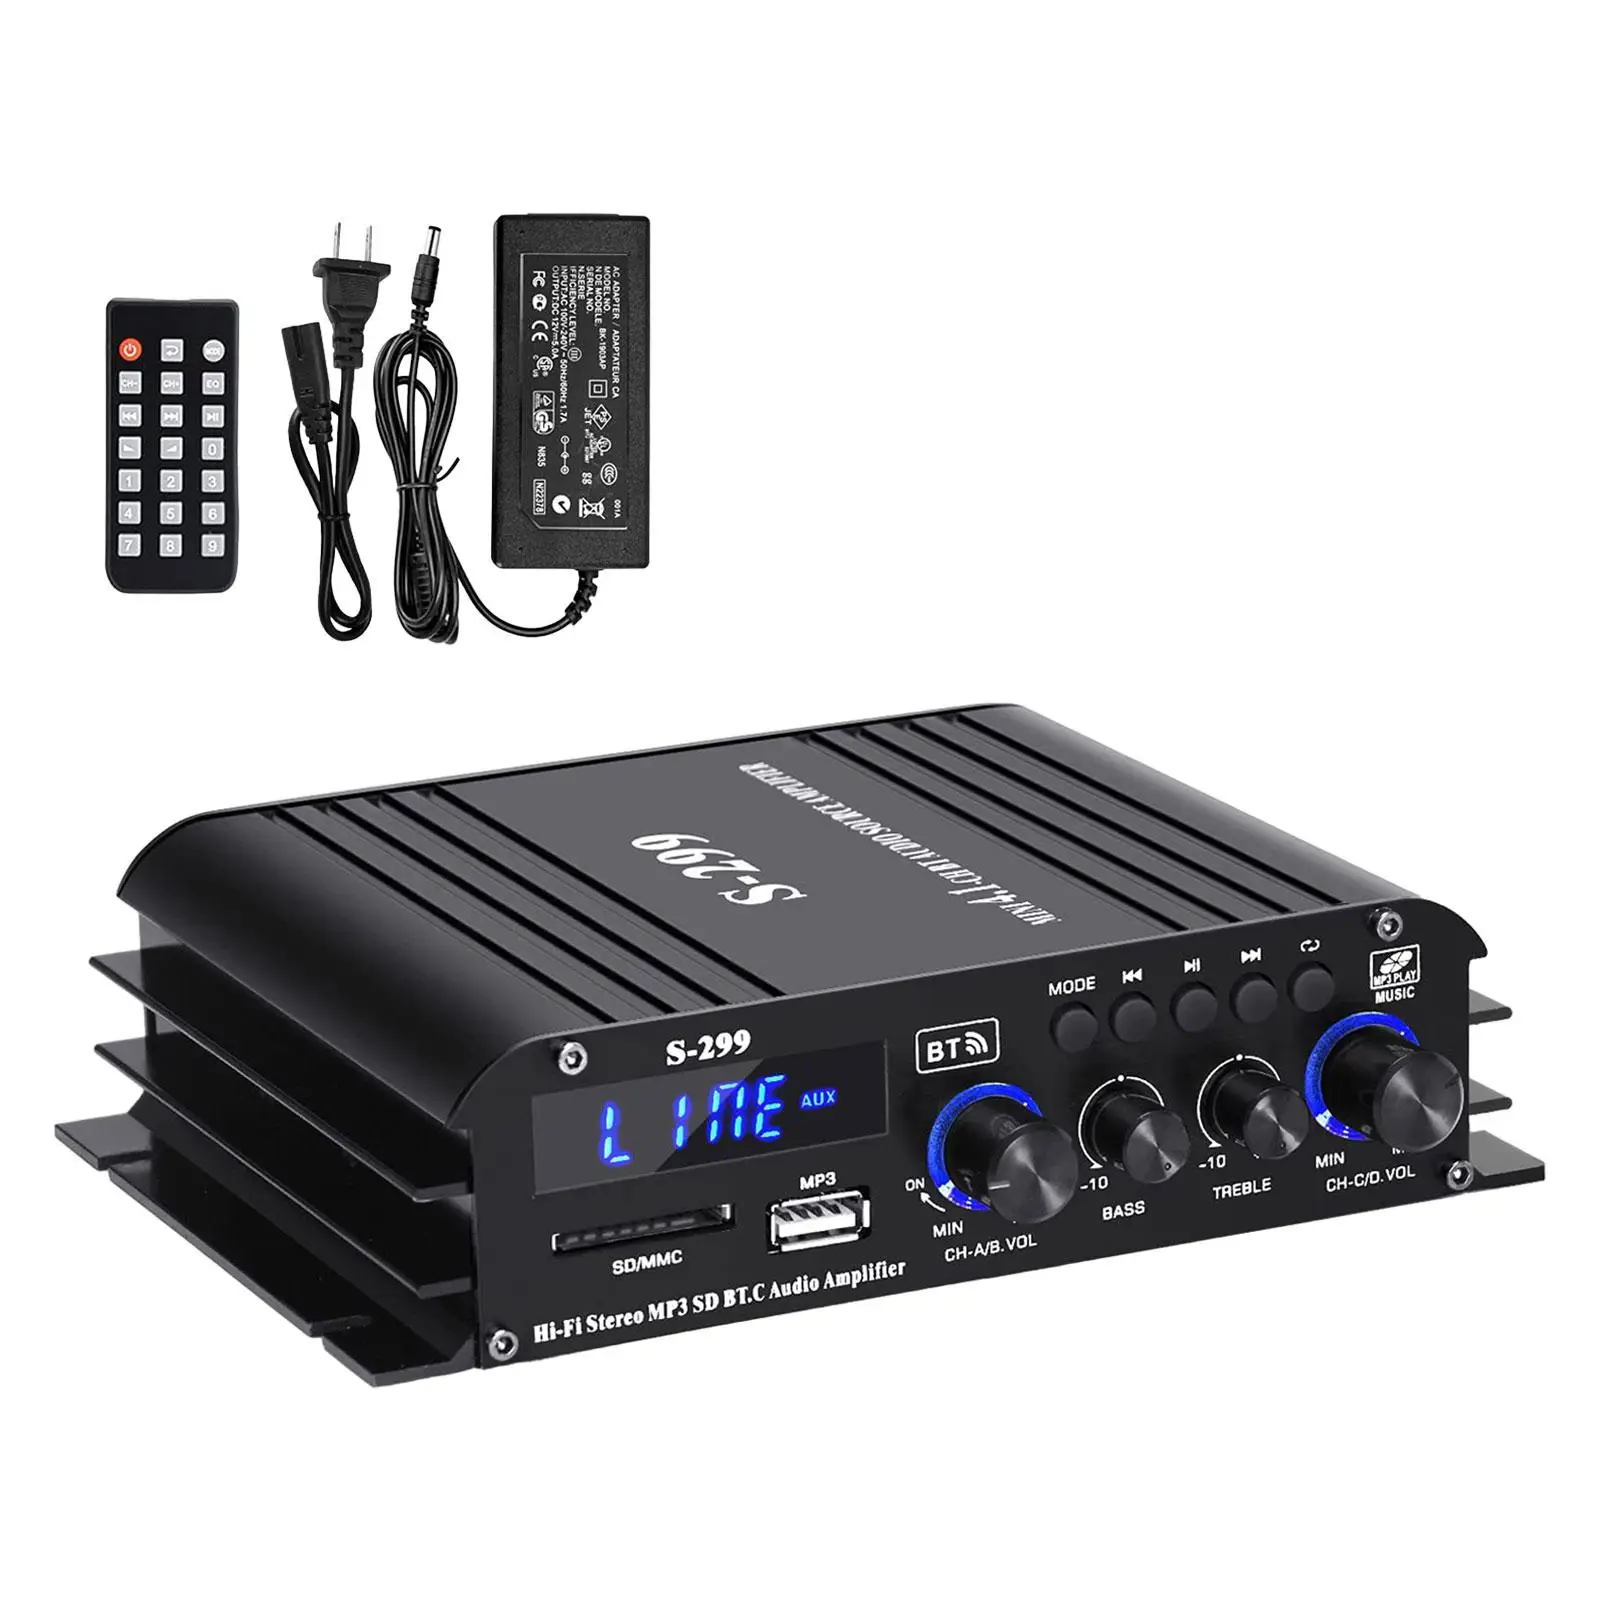 Power Amplifier Portable for Store Home Theater Subwoofer HiFi Stereo Amp MP3 USB AUX BT SD 4.1 Channel 40wx4 with Power Adapter